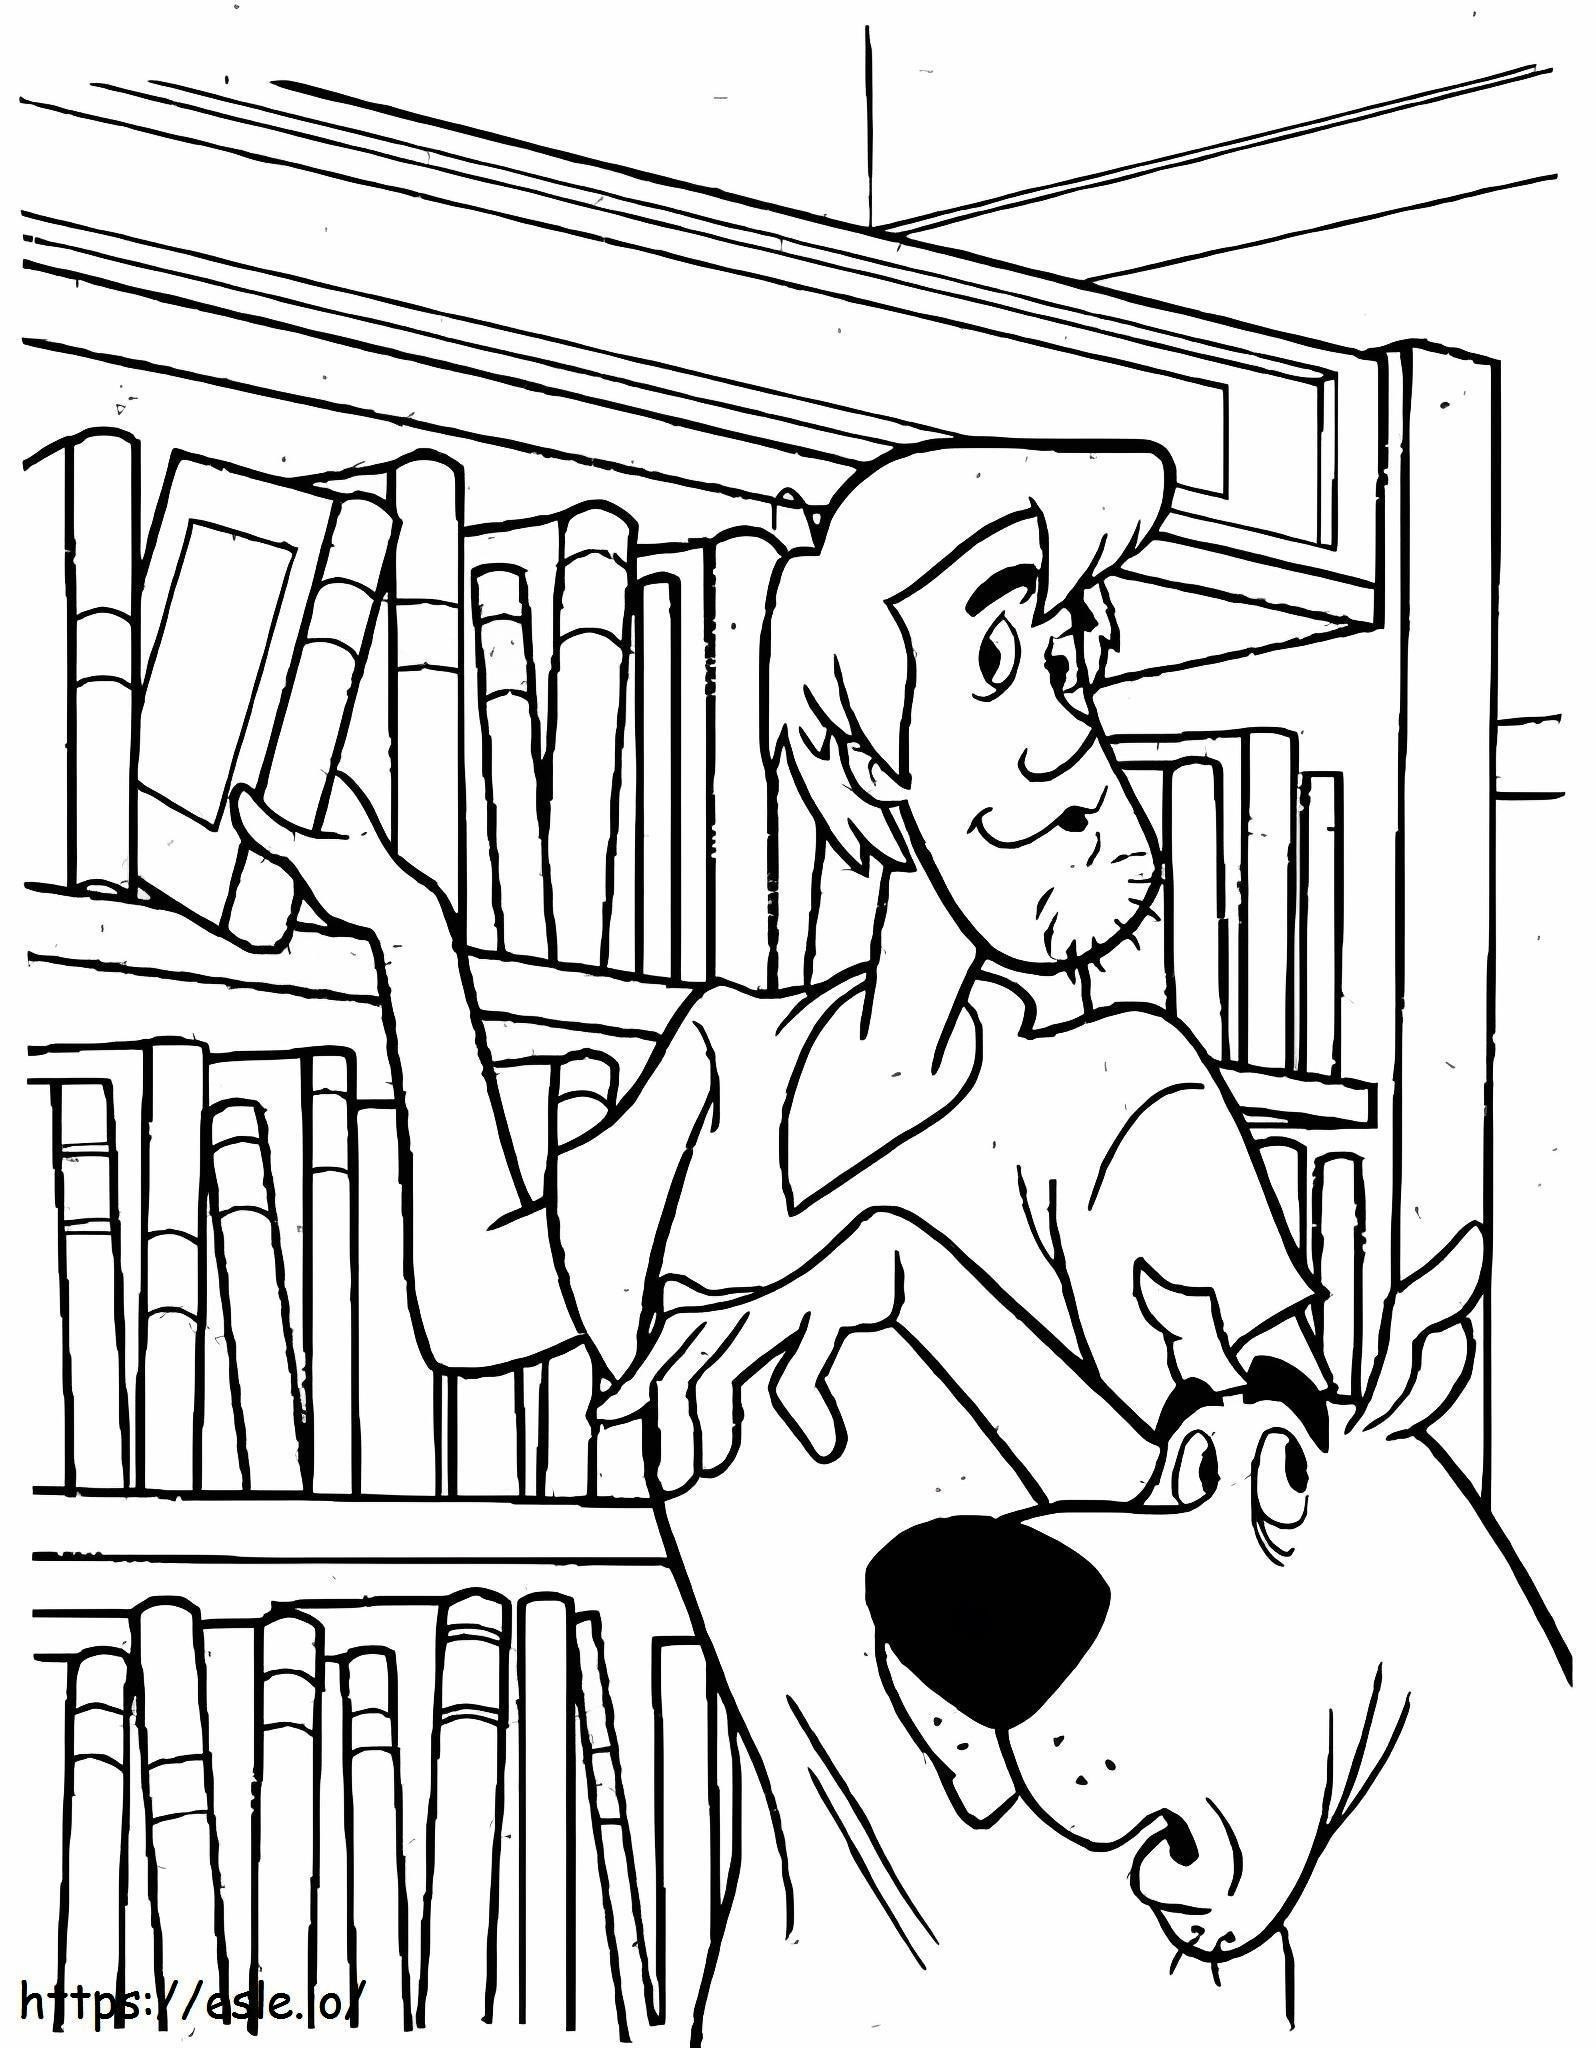 Shaggy And Scooby Doo At The Bookstore coloring page